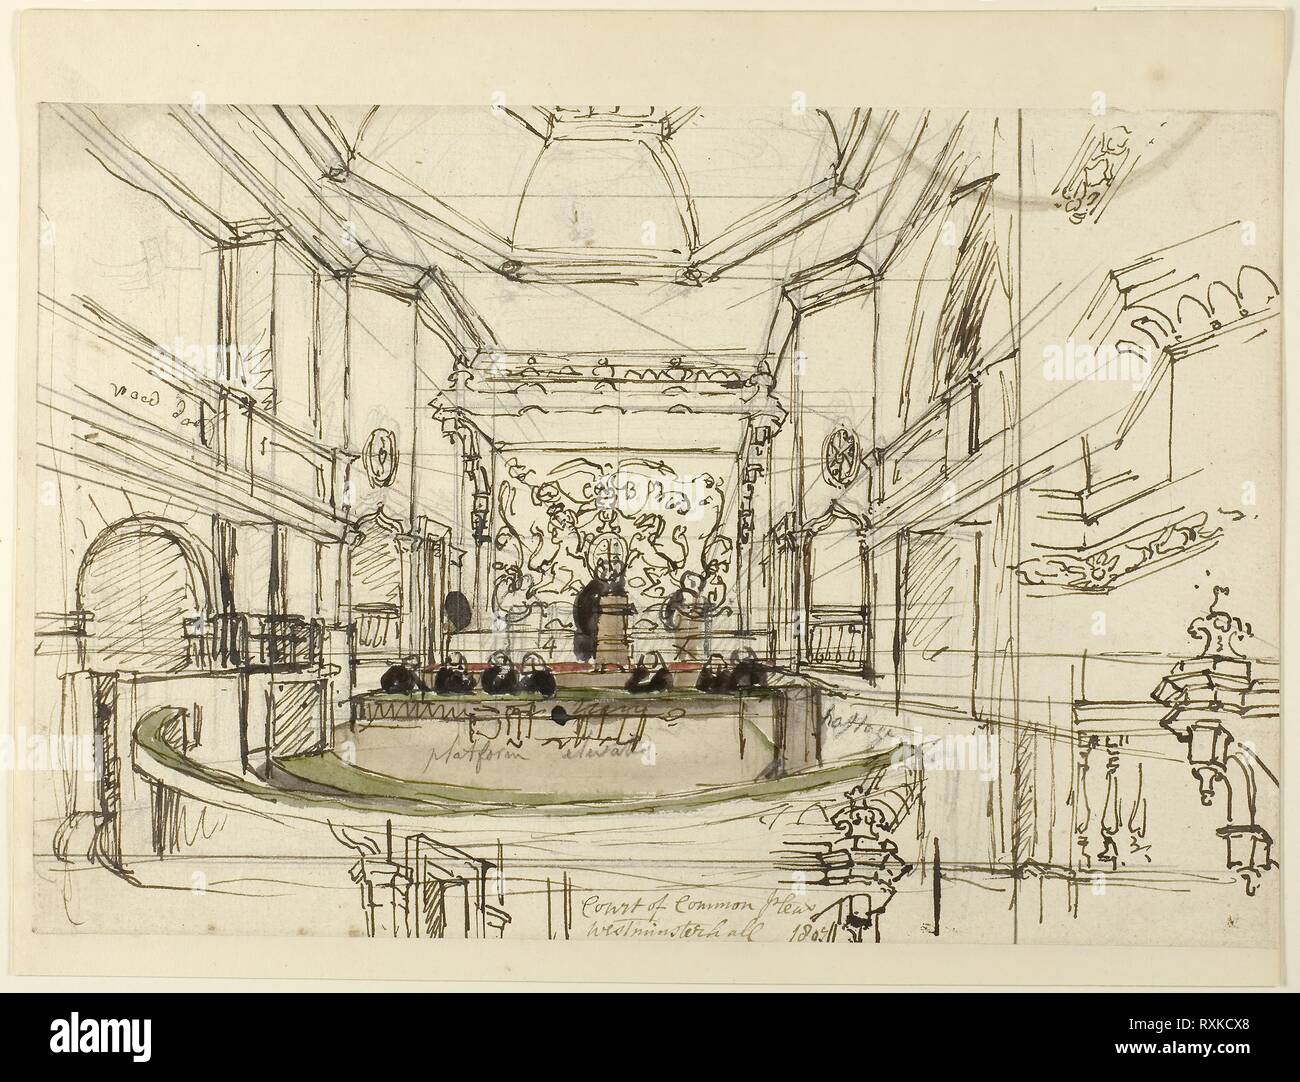 Study for Court of Common Pleas, Westminster Hall, from Microcosm of London. Augustus Charles Pugin (English, born France, 1762-1832); Thomas Rowlandson (English, 1756-1827). Date: 1807. Dimensions: 210 × 314 mm. Pen and brown ink with brush and brown wash and watercolor, over graphite, on ivory wove paper. Origin: England. Museum: The Chicago Art Institute. Stock Photo